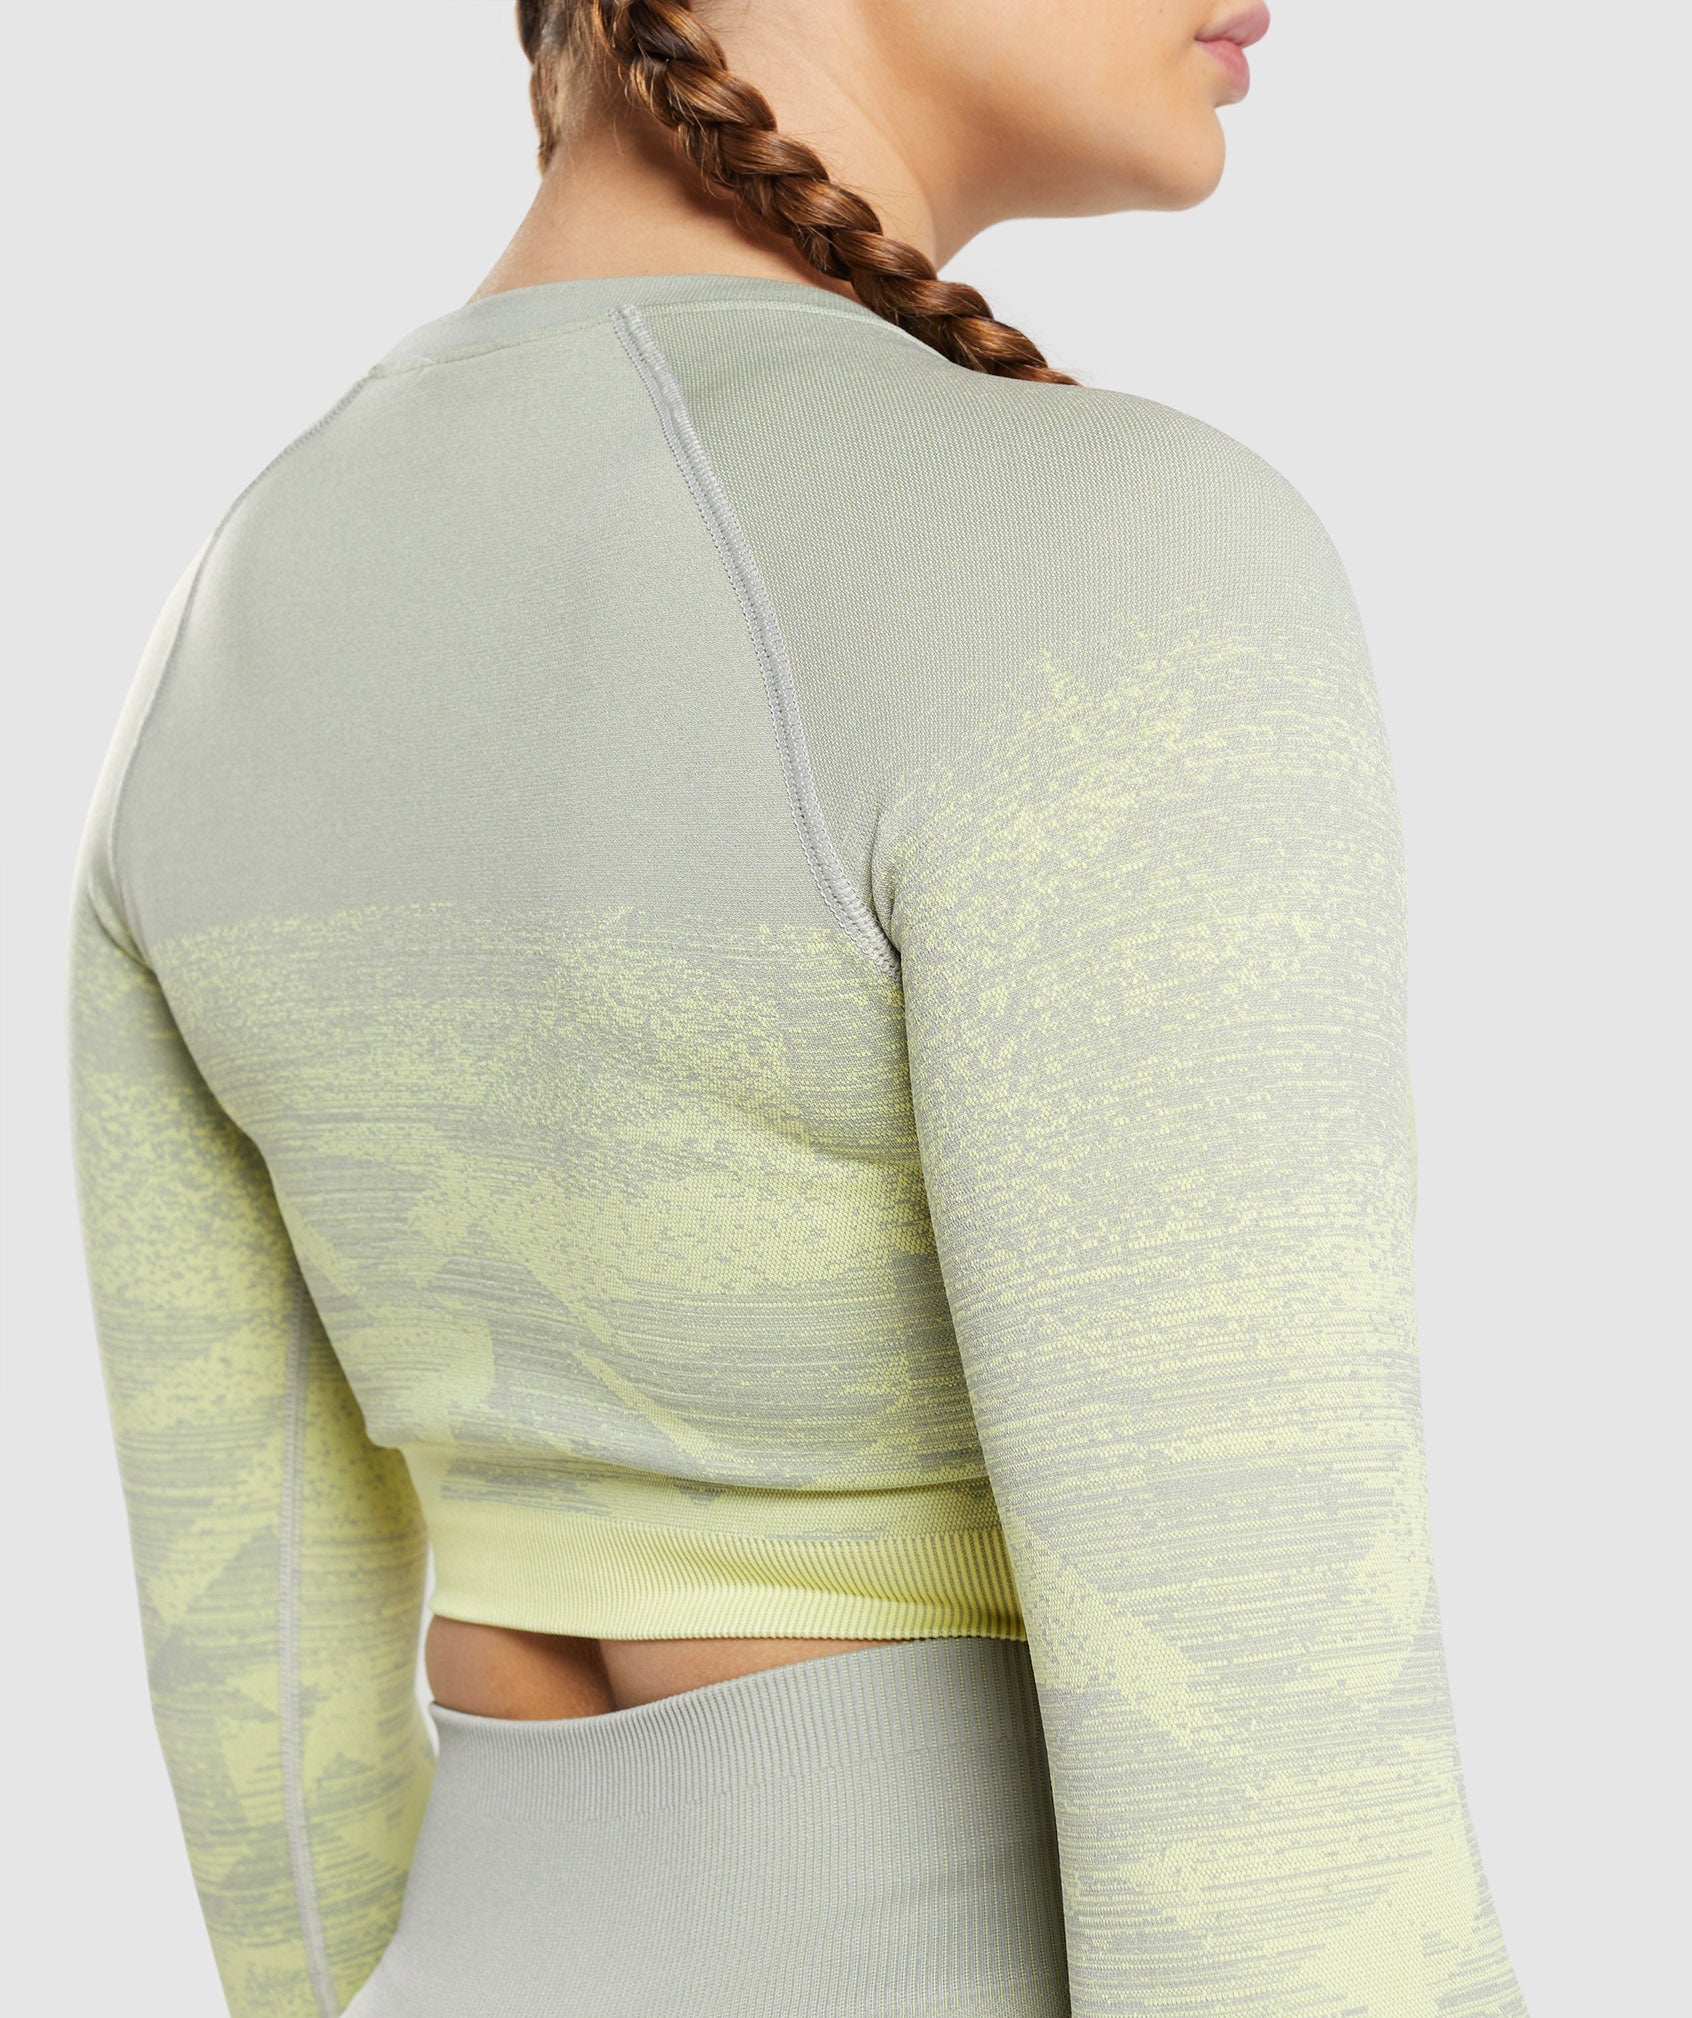 Adapt Ombre Crop Top in Triangle | Taupe Grey - view 6